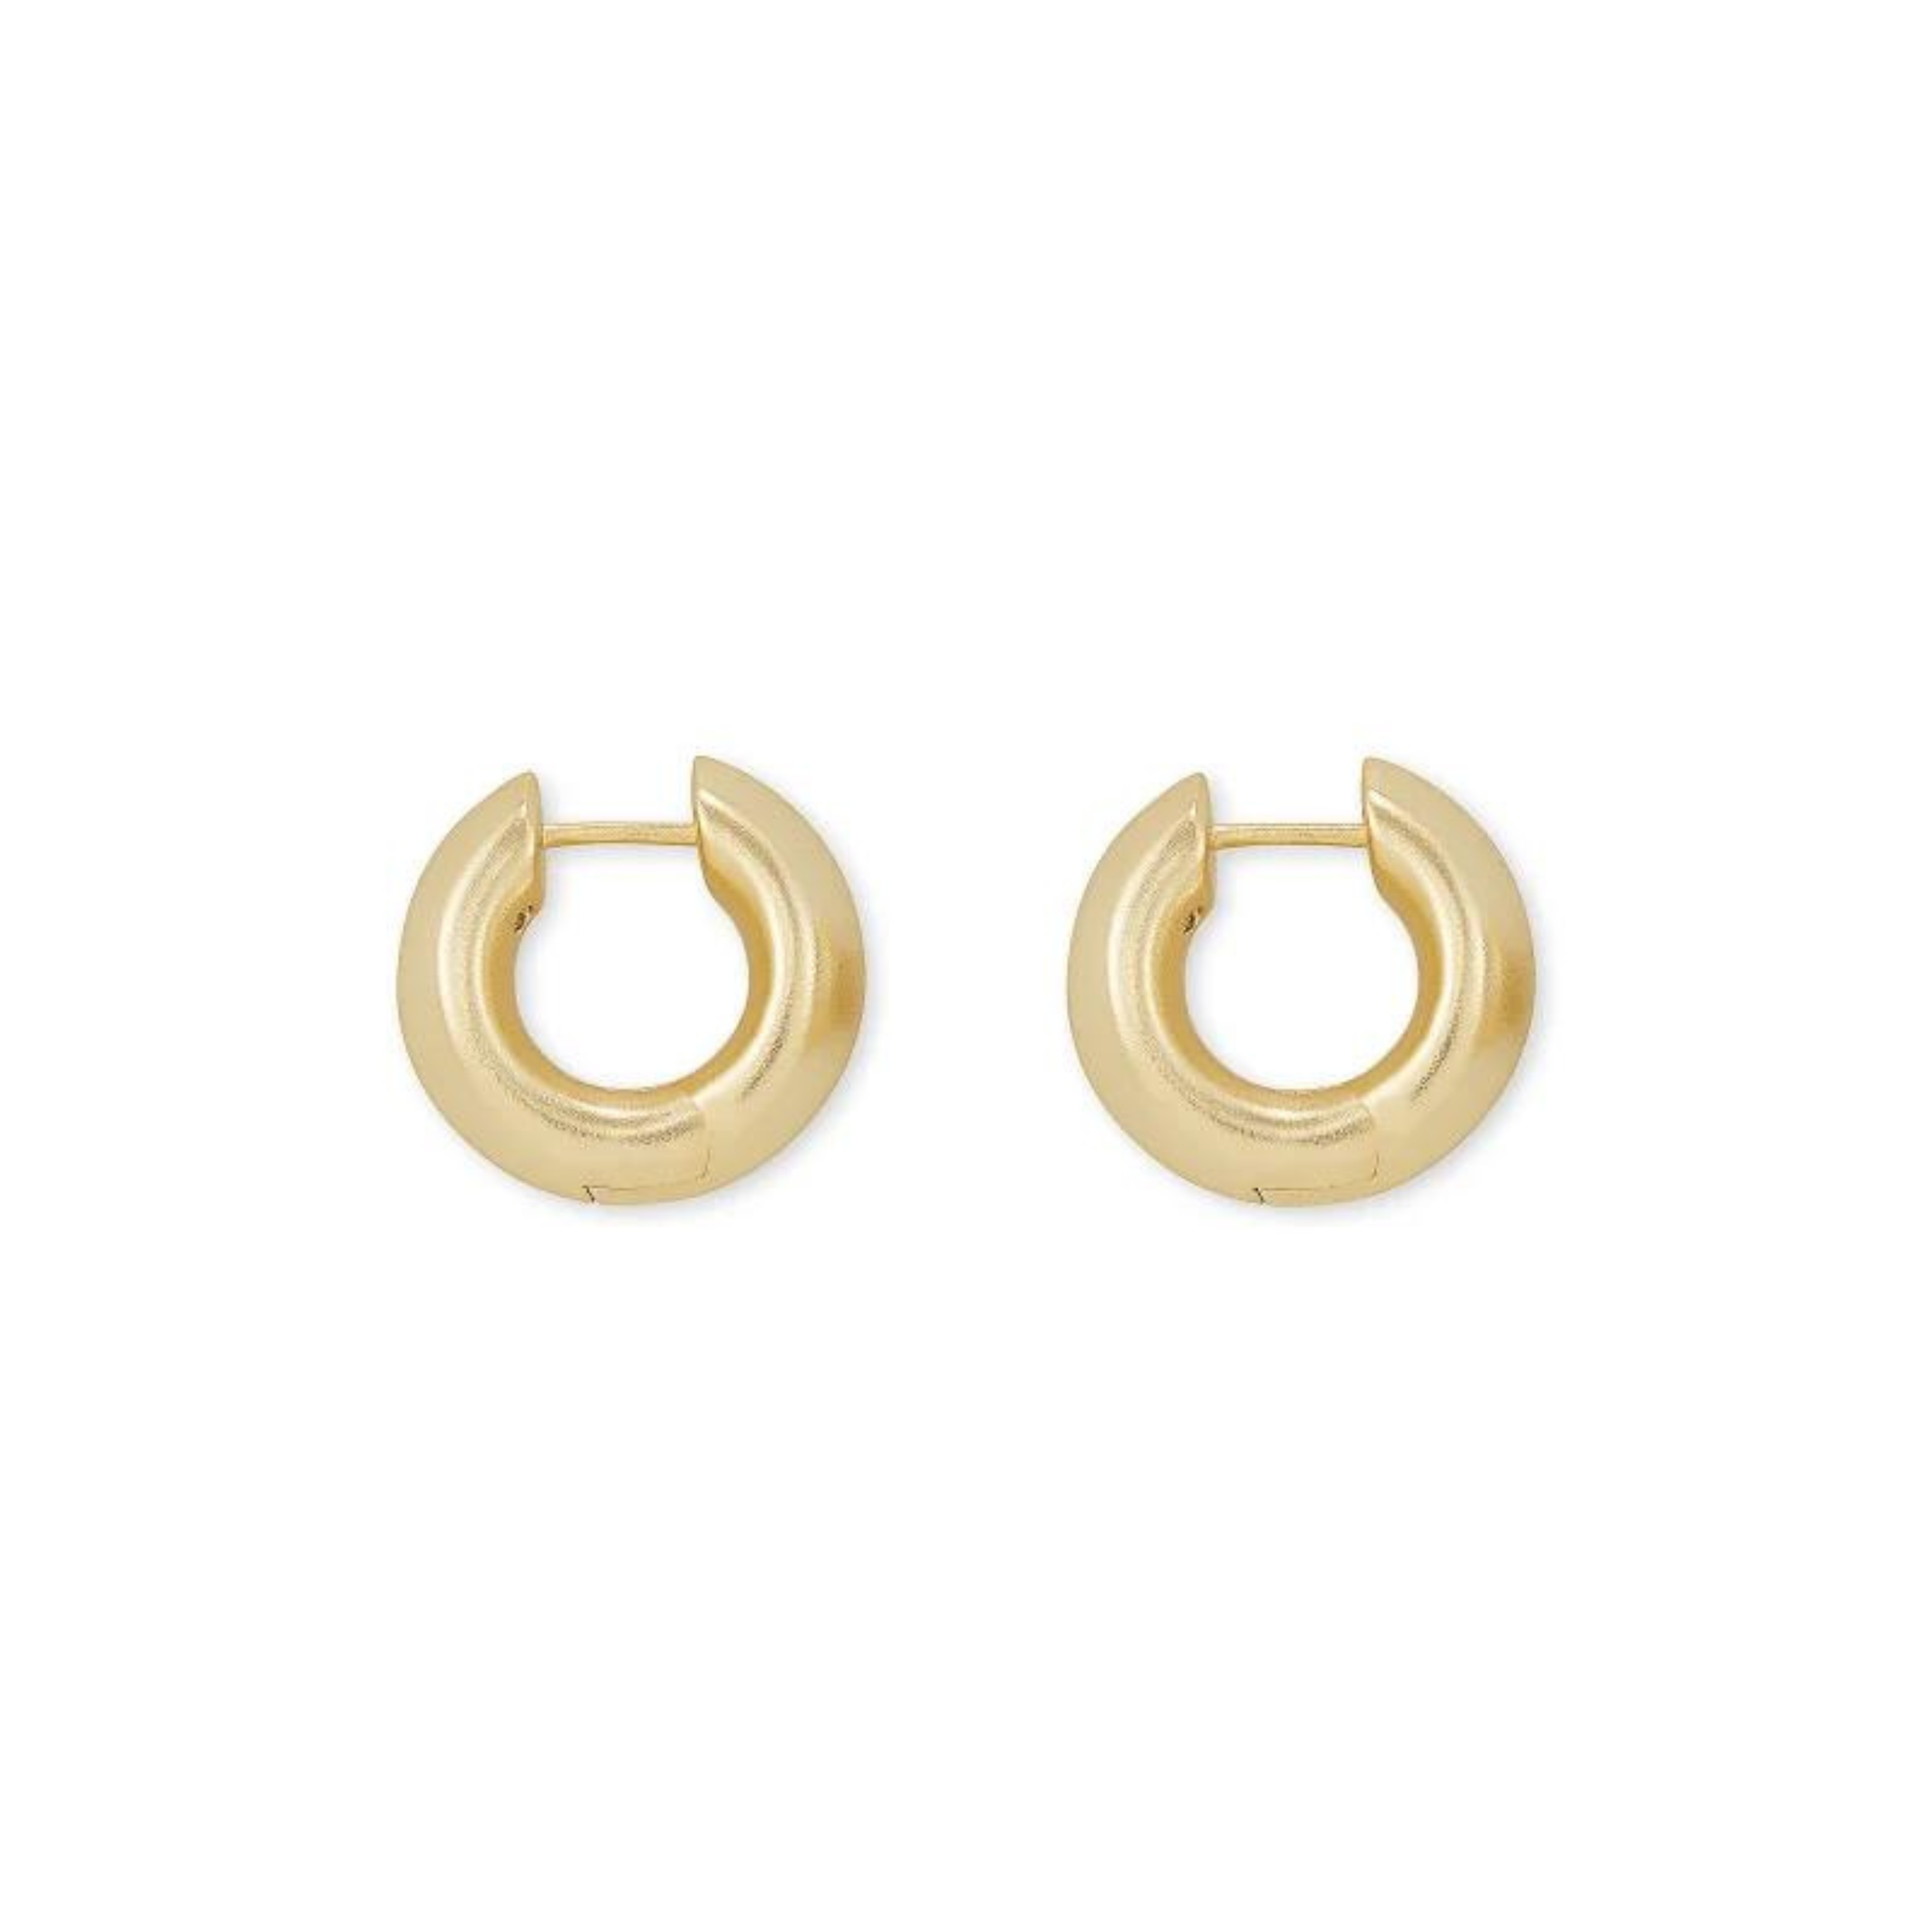 Gold hoops pictured on a white background.